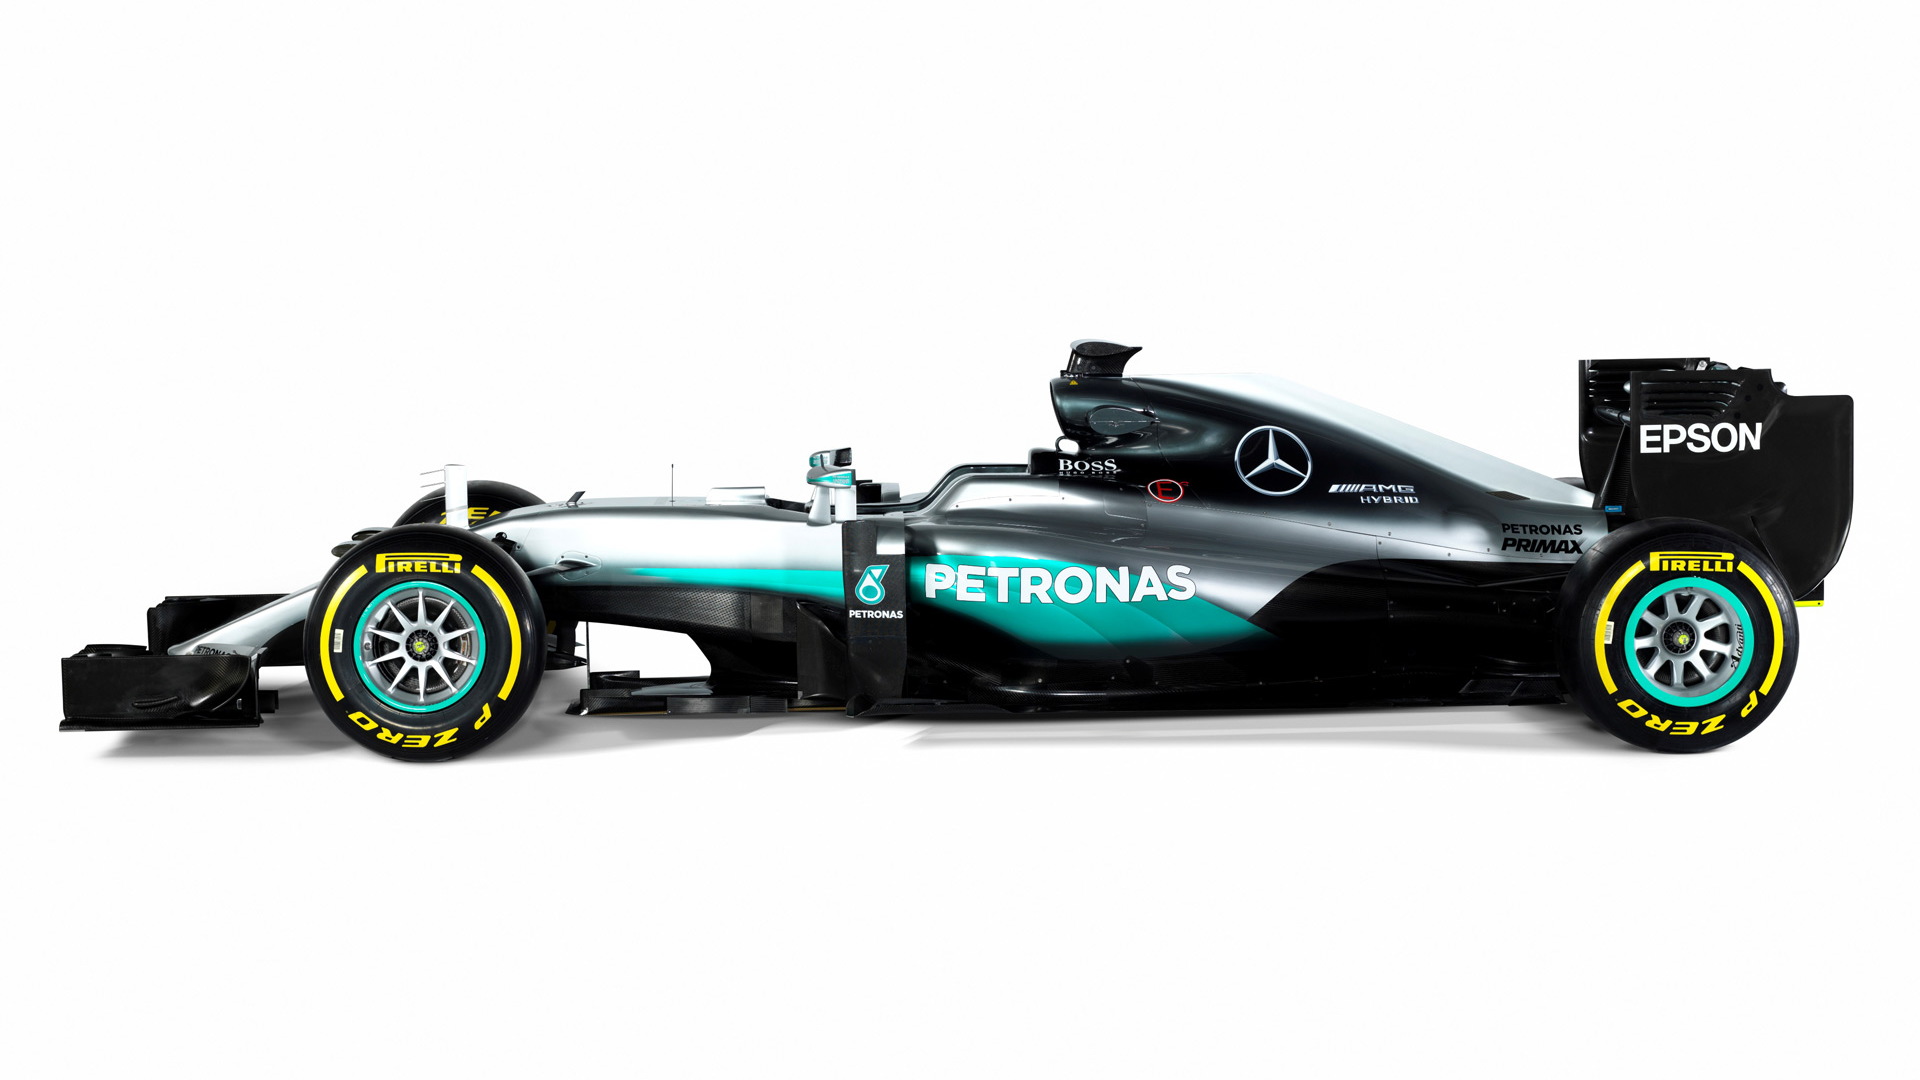 Mercedes' Car For The 2016 Formula One Season Is The W07: Video